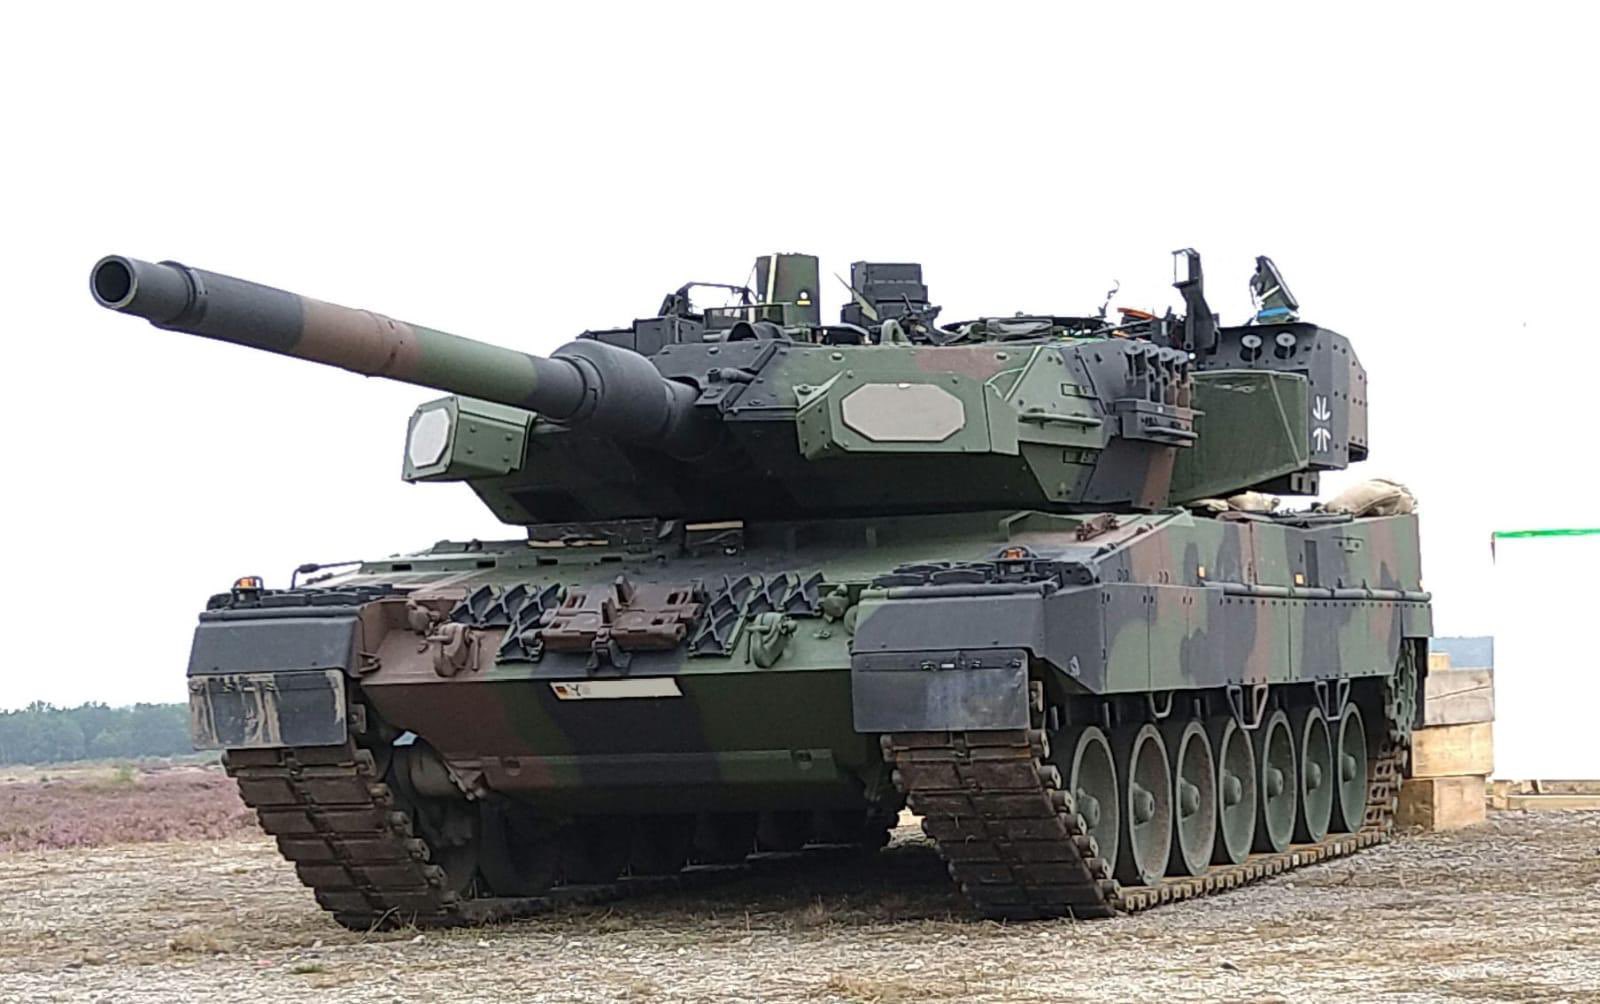 Rafael TROPHY active protection system (APS) successfully tested on German Army Leopard 2A7 main battle Tank